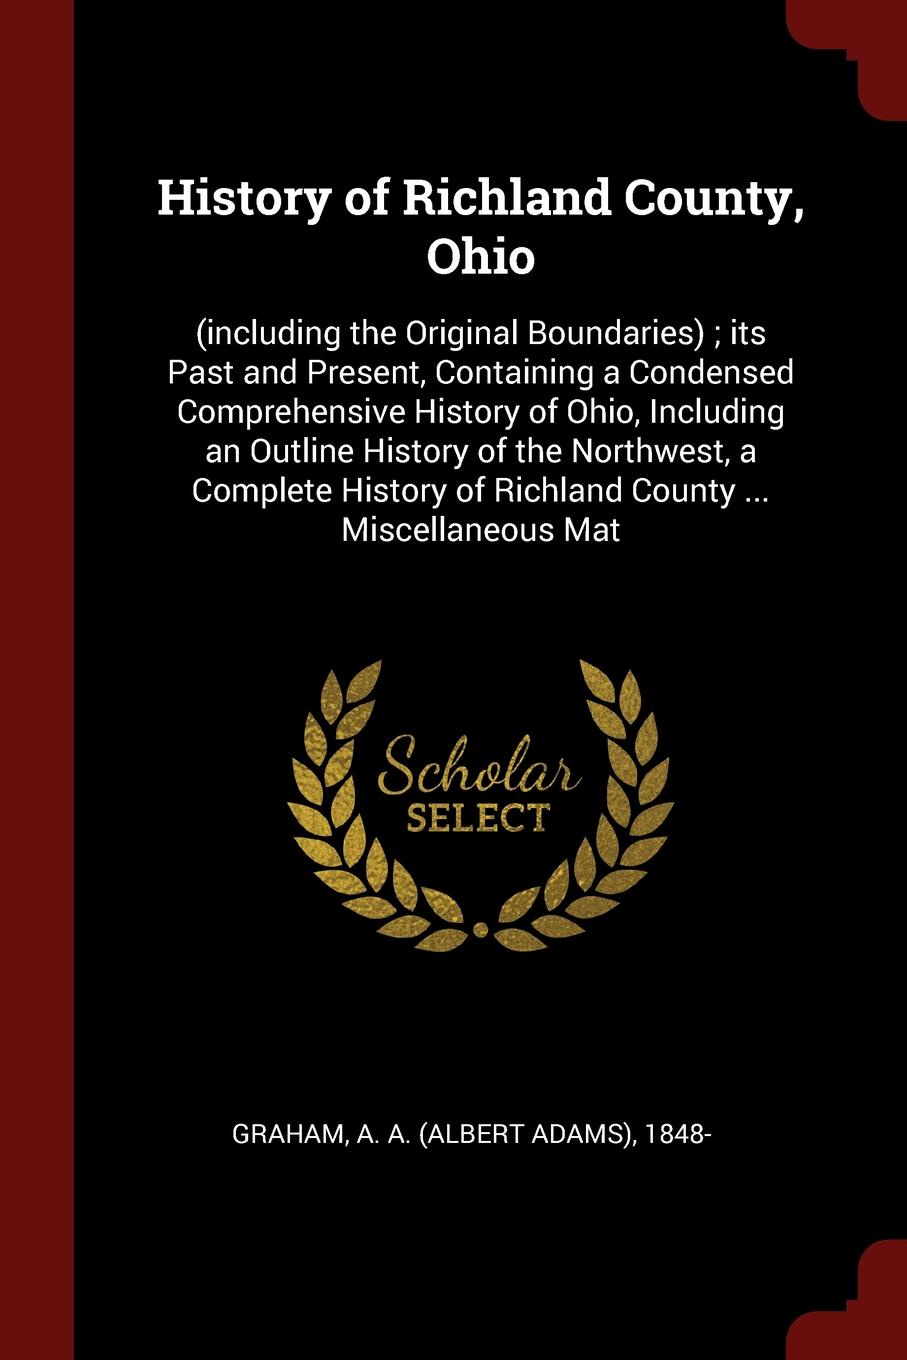 History of Richland County, Ohio. (including the Original Boundaries) ; its Past and Present, Containing a Condensed Comprehensive History of Ohio, Including an Outline History of the Northwest, a Complete History of Richland County ... Miscellane...